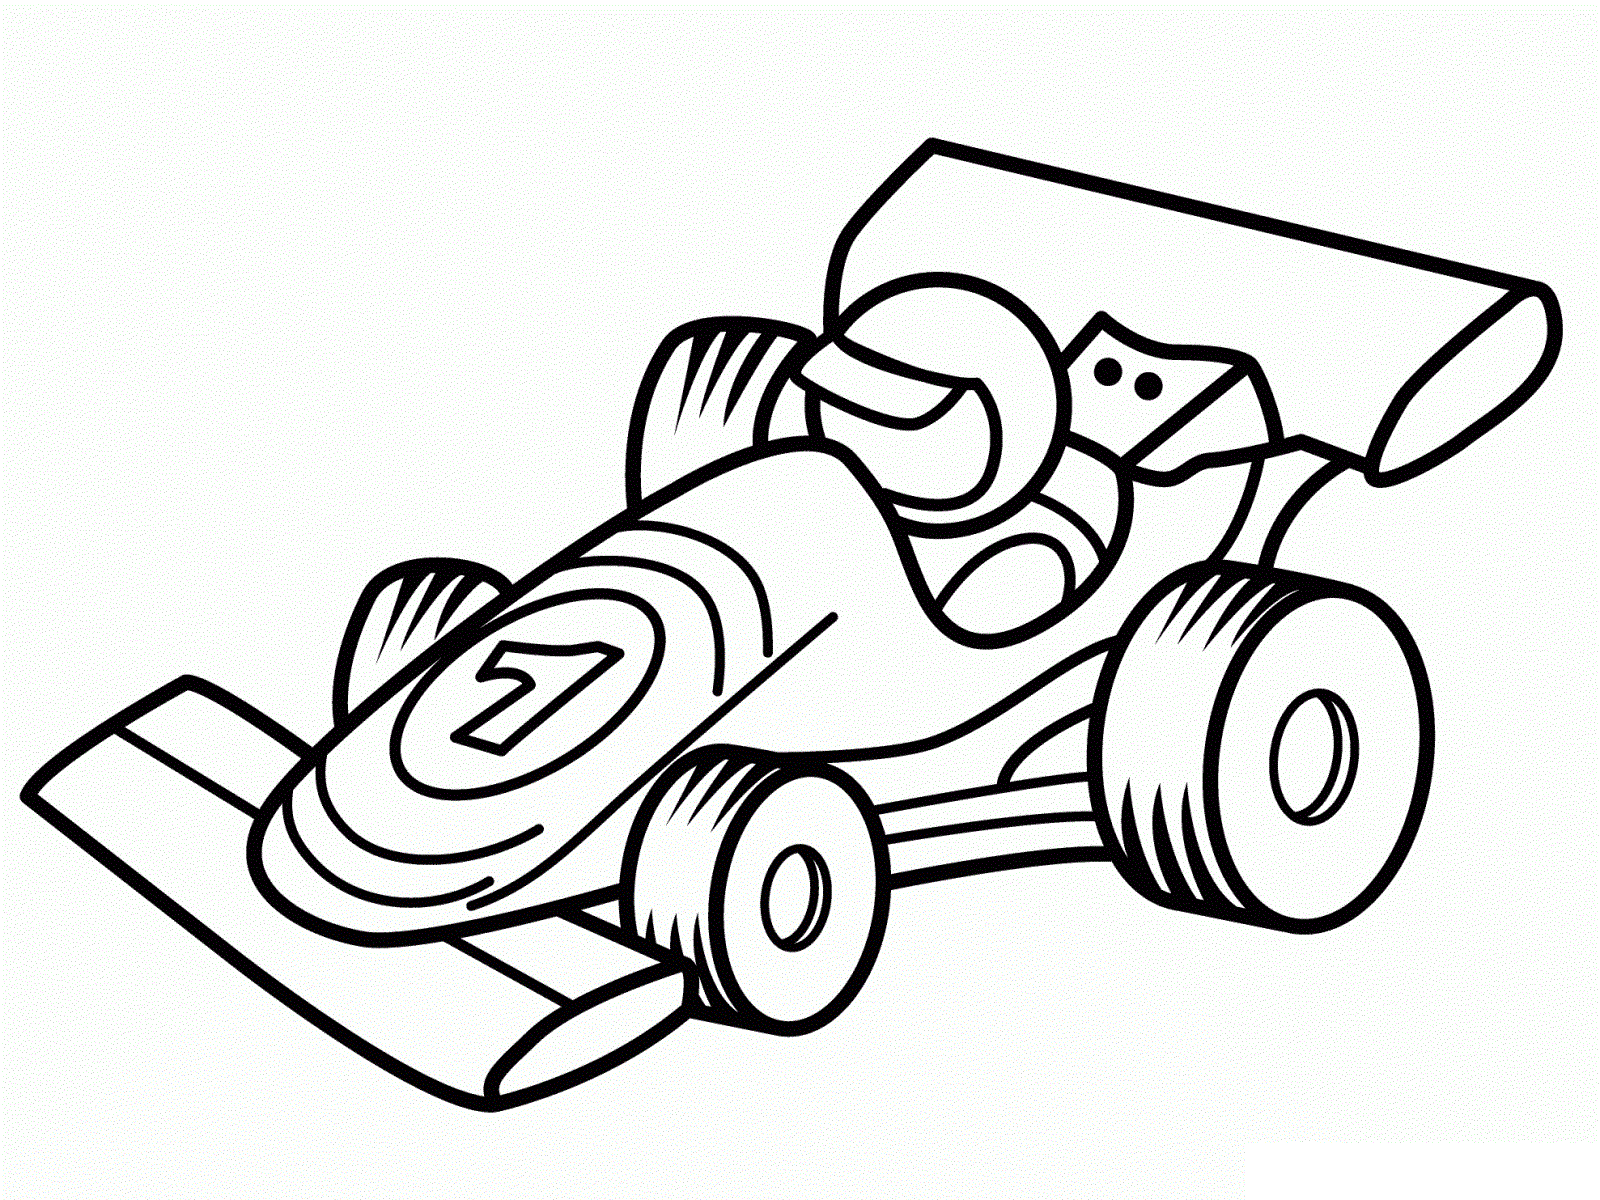 Little Formula Racing Car Coloring Page Free Printable Coloring Pages For Kids